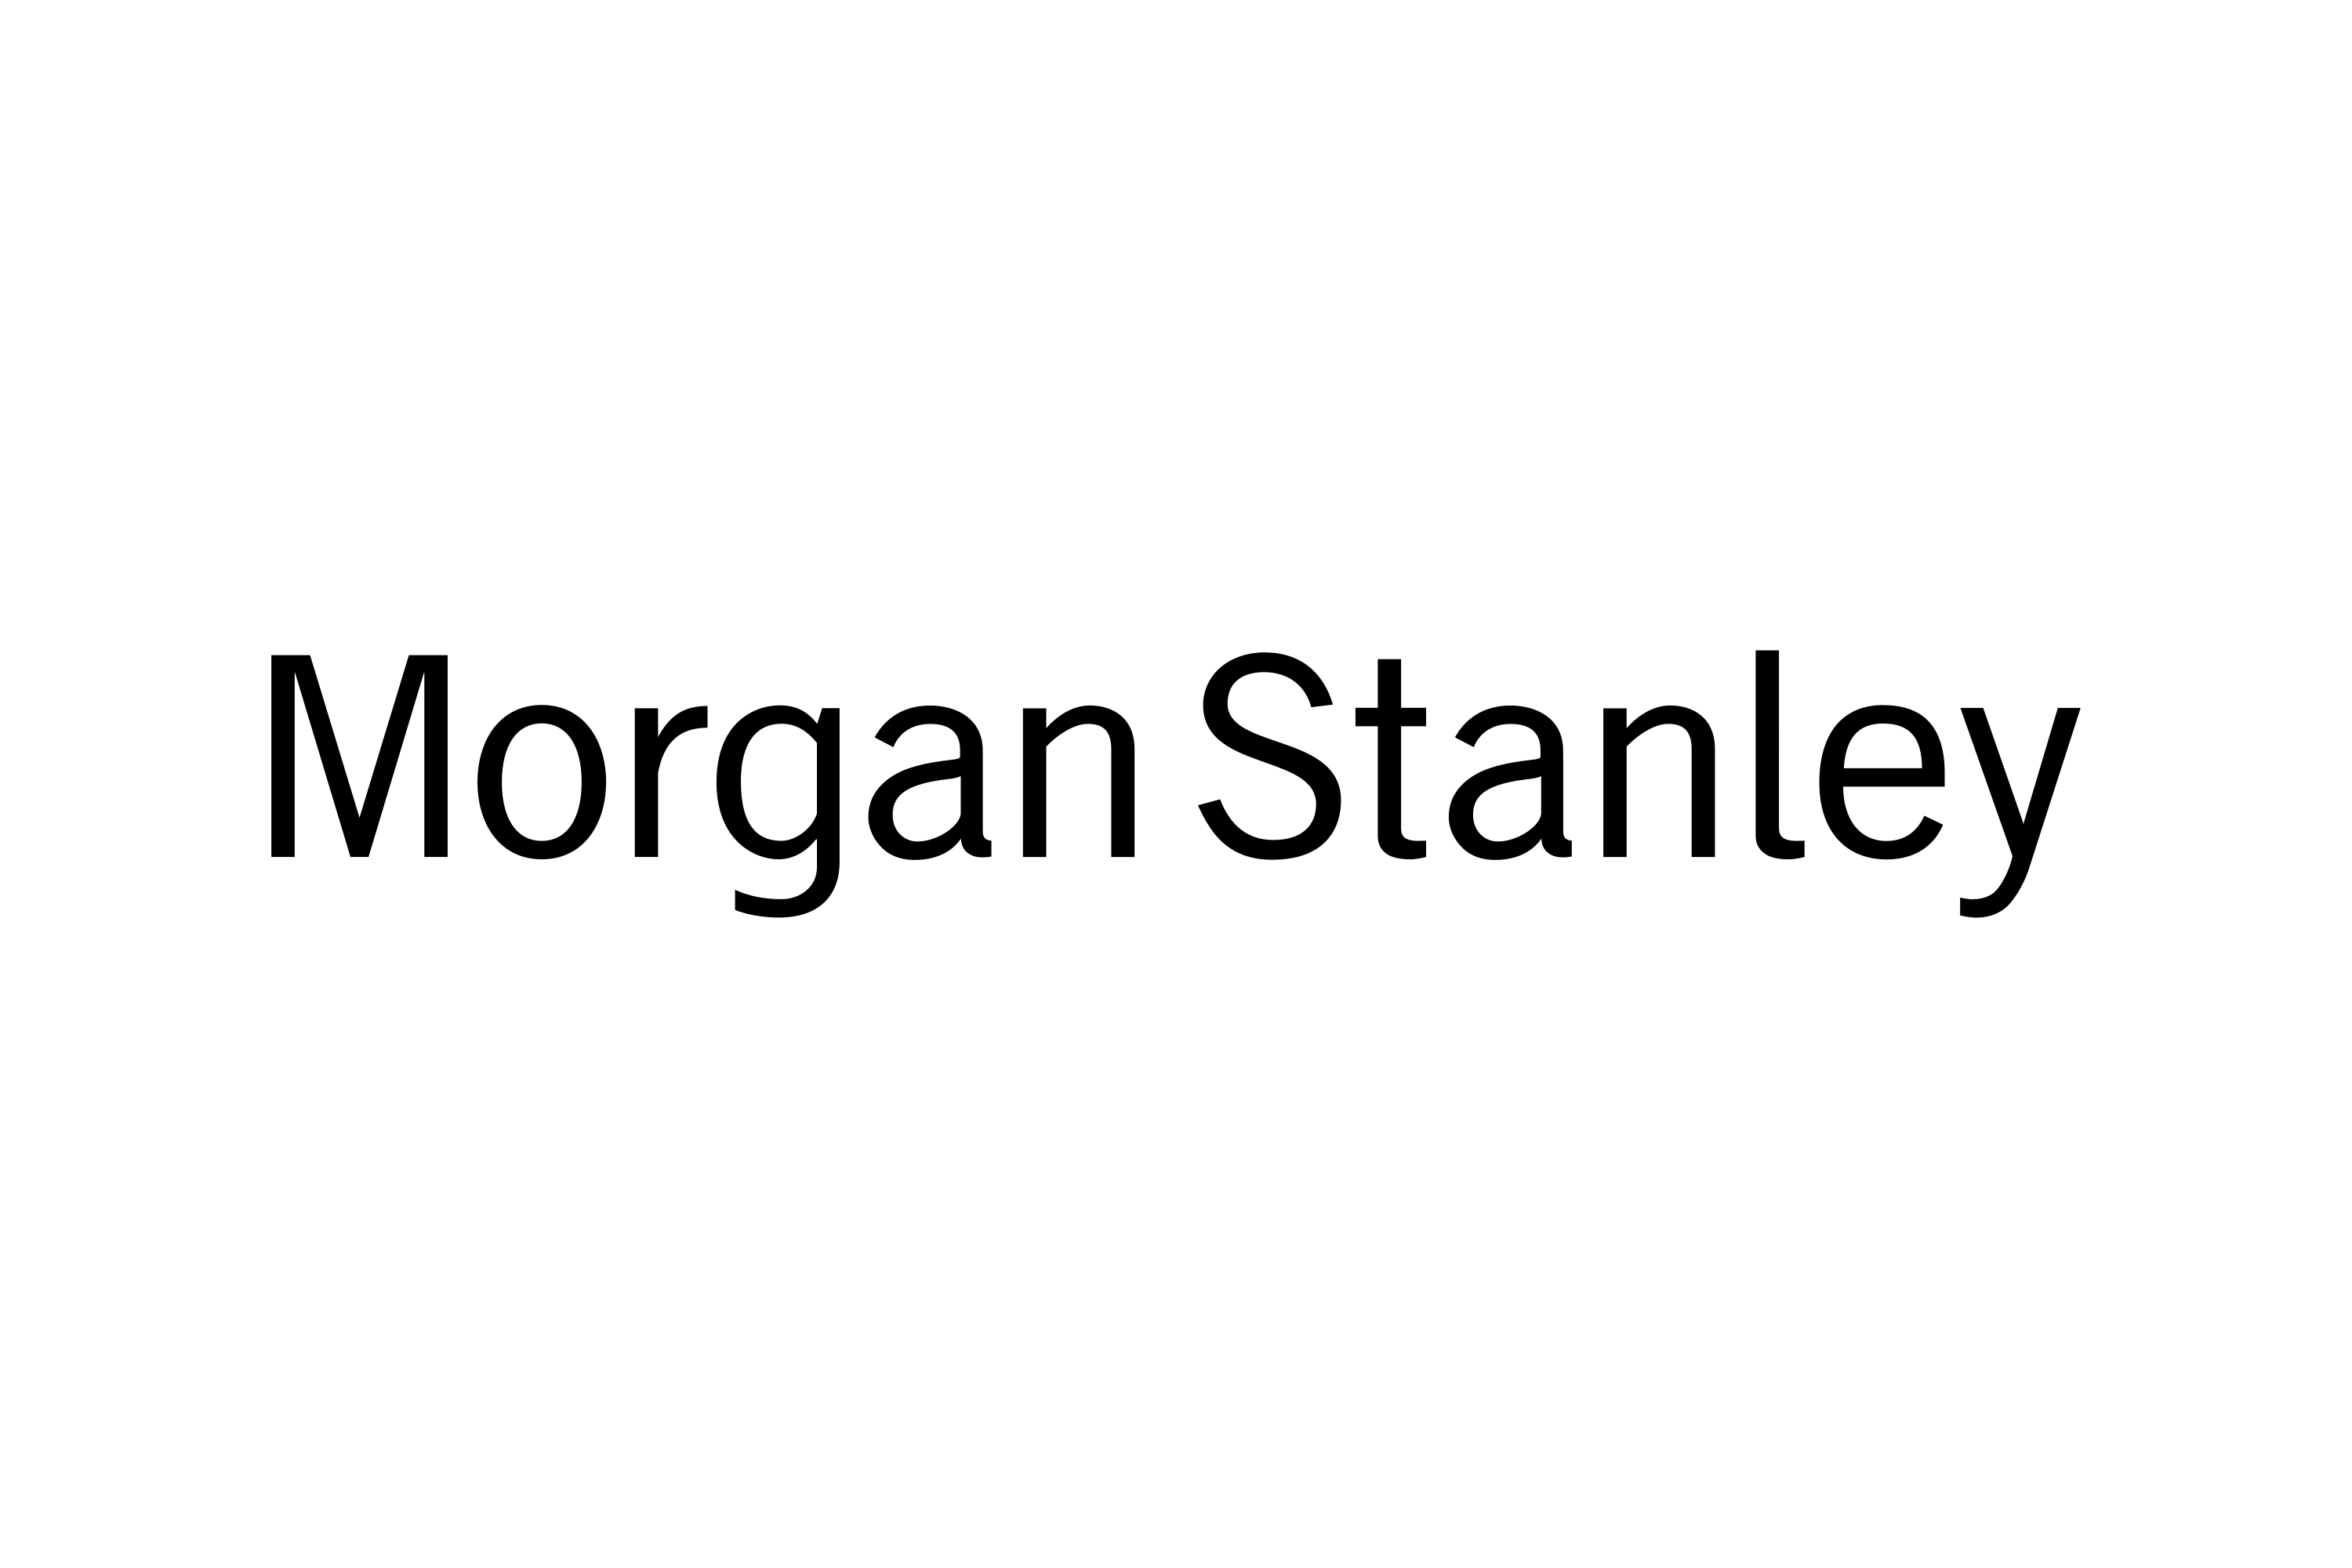 Download Morgan Stanley Logo In Svg Vector Or Png File Format Pluspng.com  - Morgan Stanley, Transparent background PNG HD thumbnail